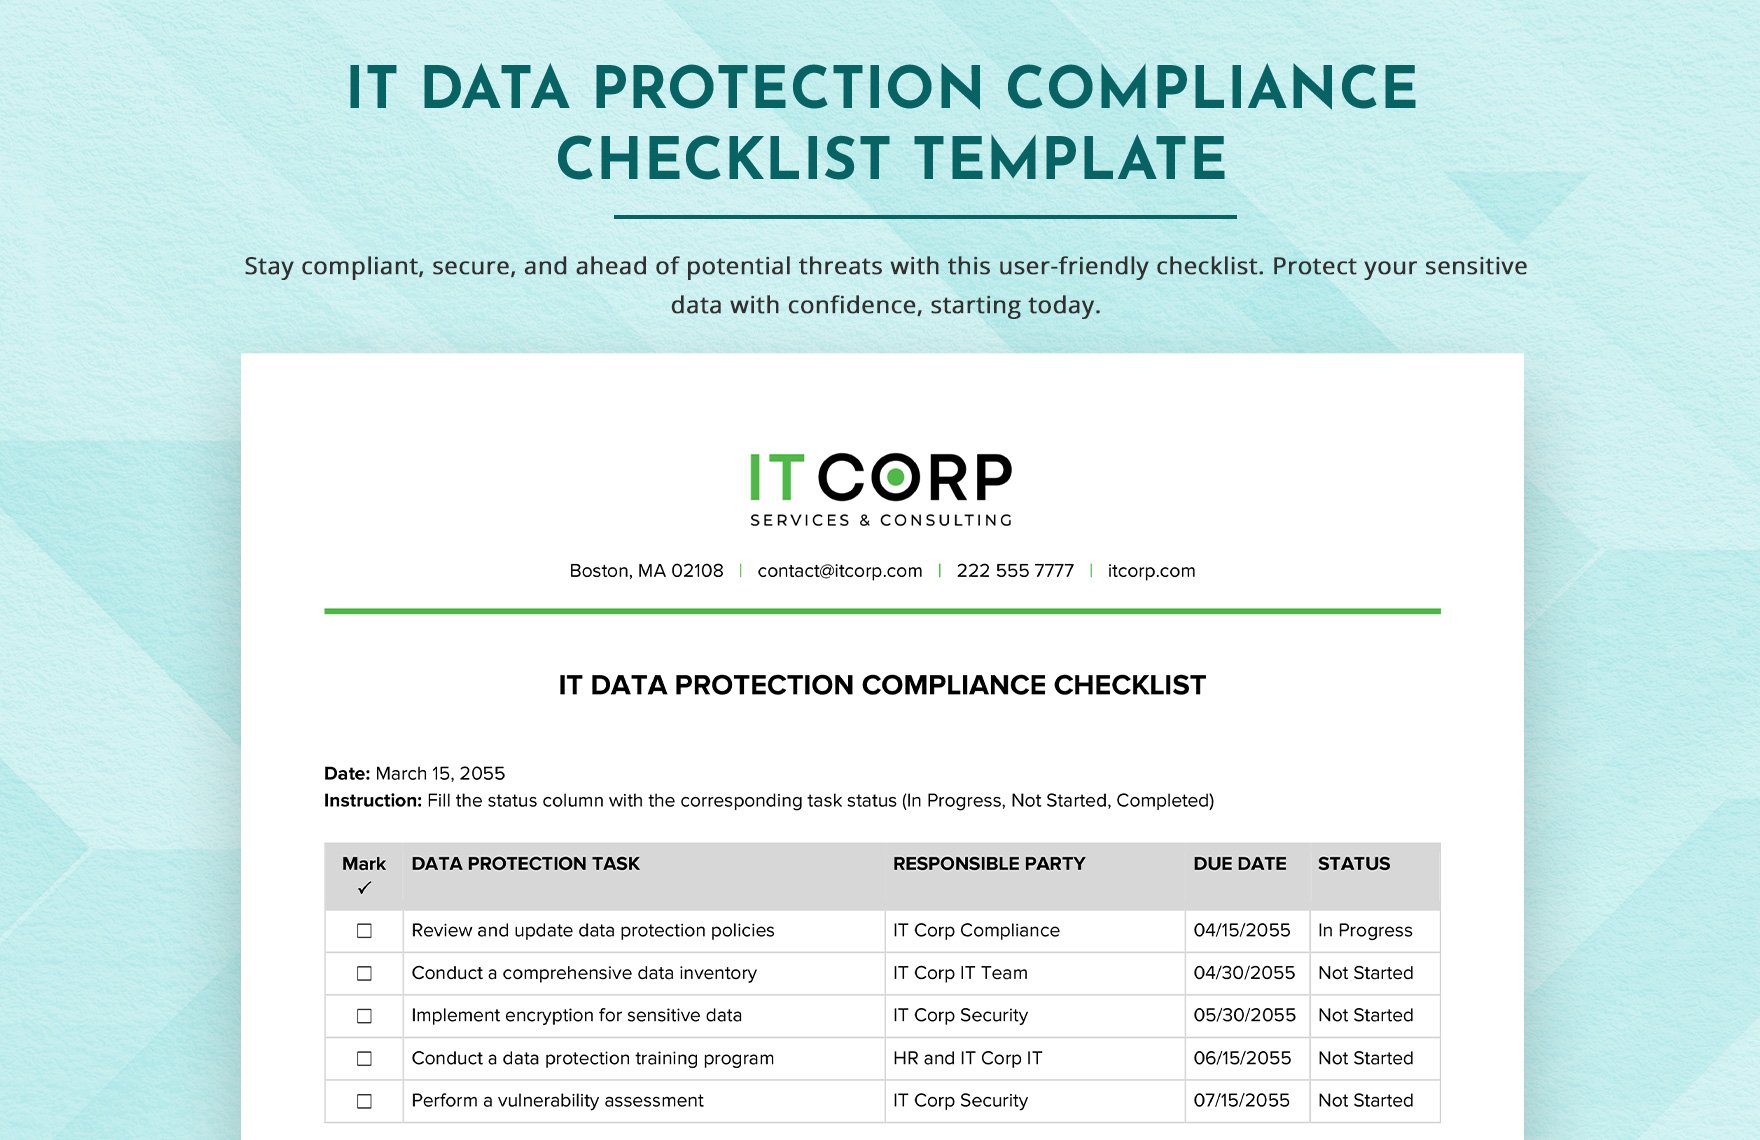 IT Data Protection Compliance Checklist Template